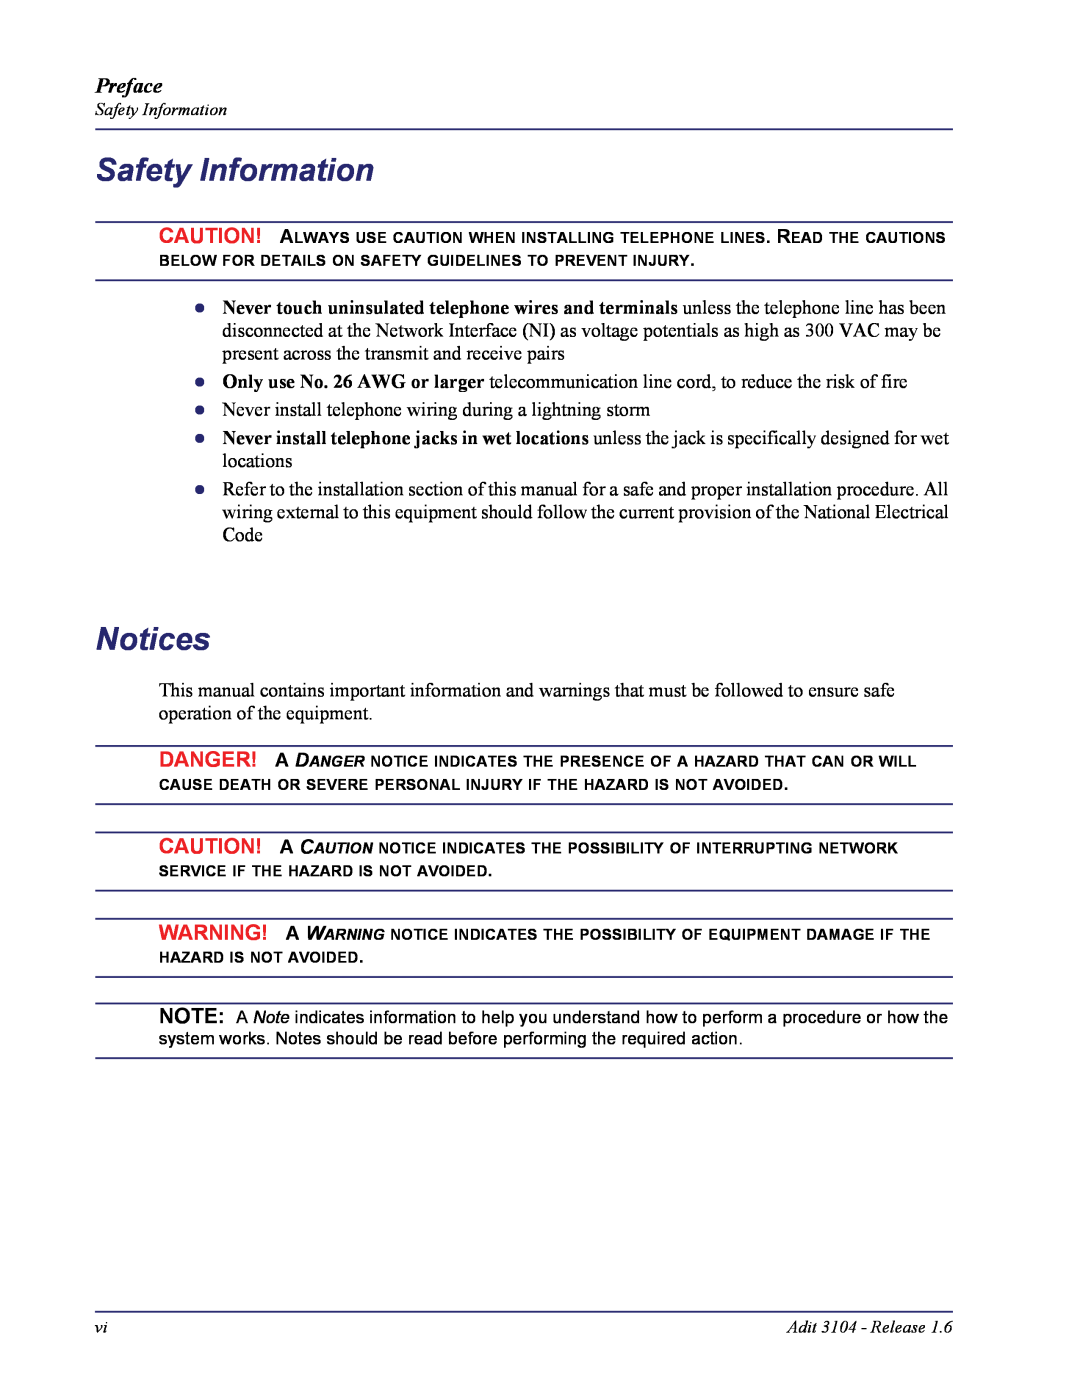 Carrier Access Adit 3104 user manual Safety Information, Notices, Preface 